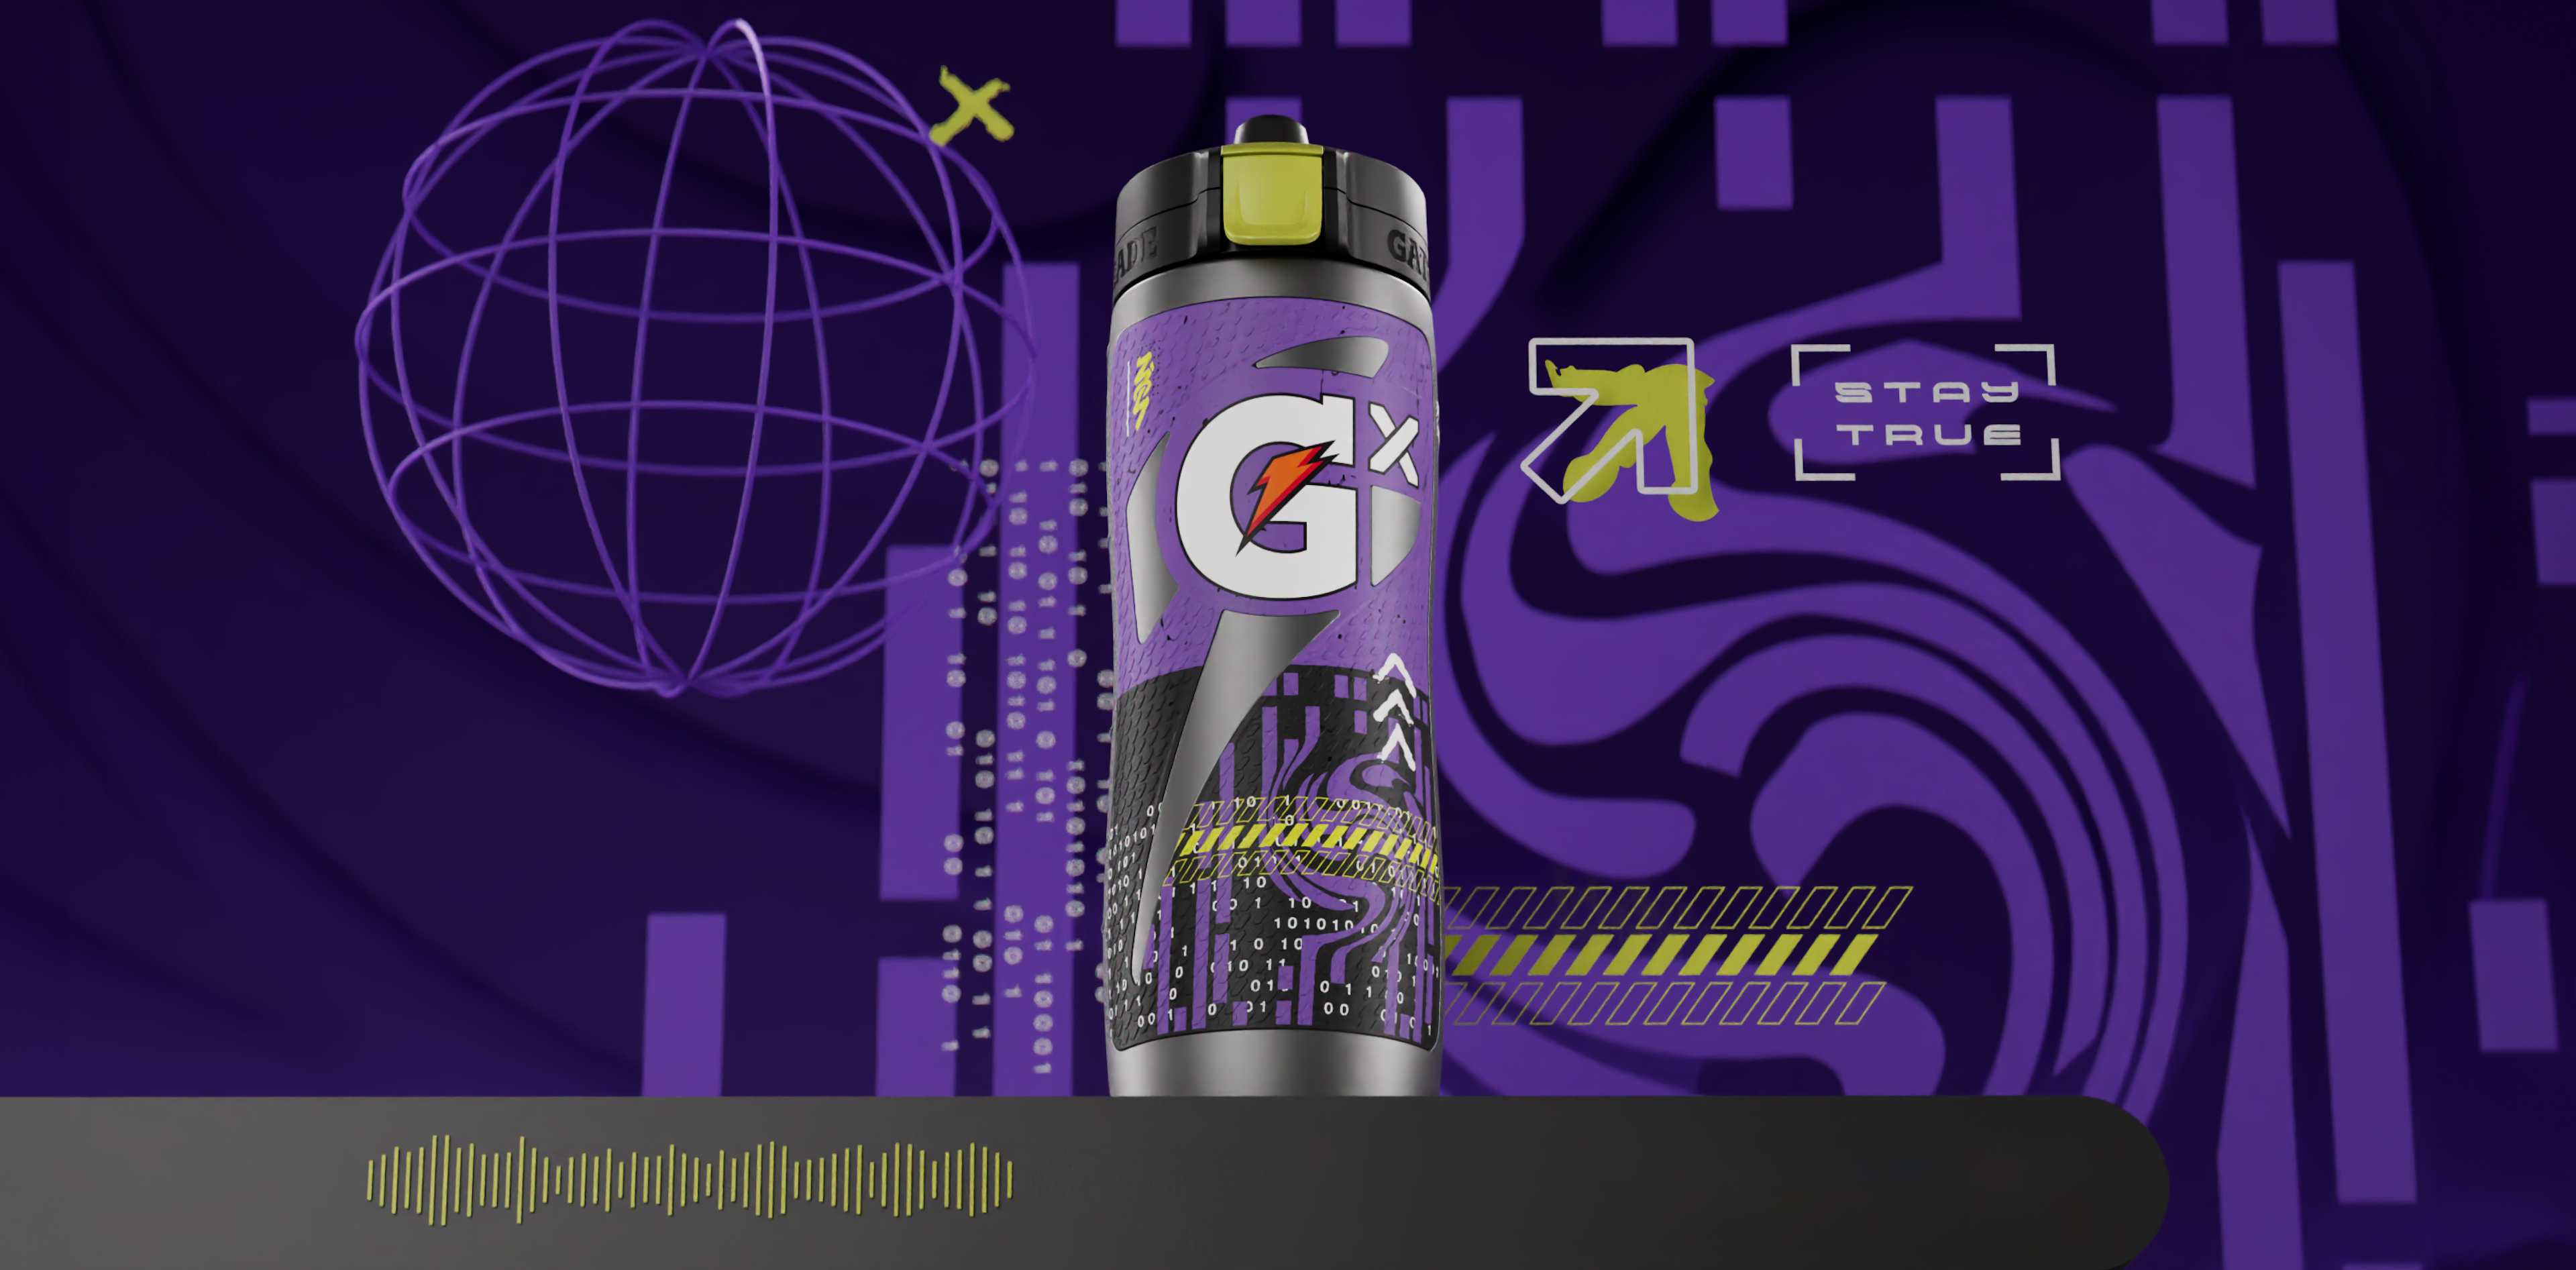 The Zion Williamson Smart Bottle with purple graphics on the background